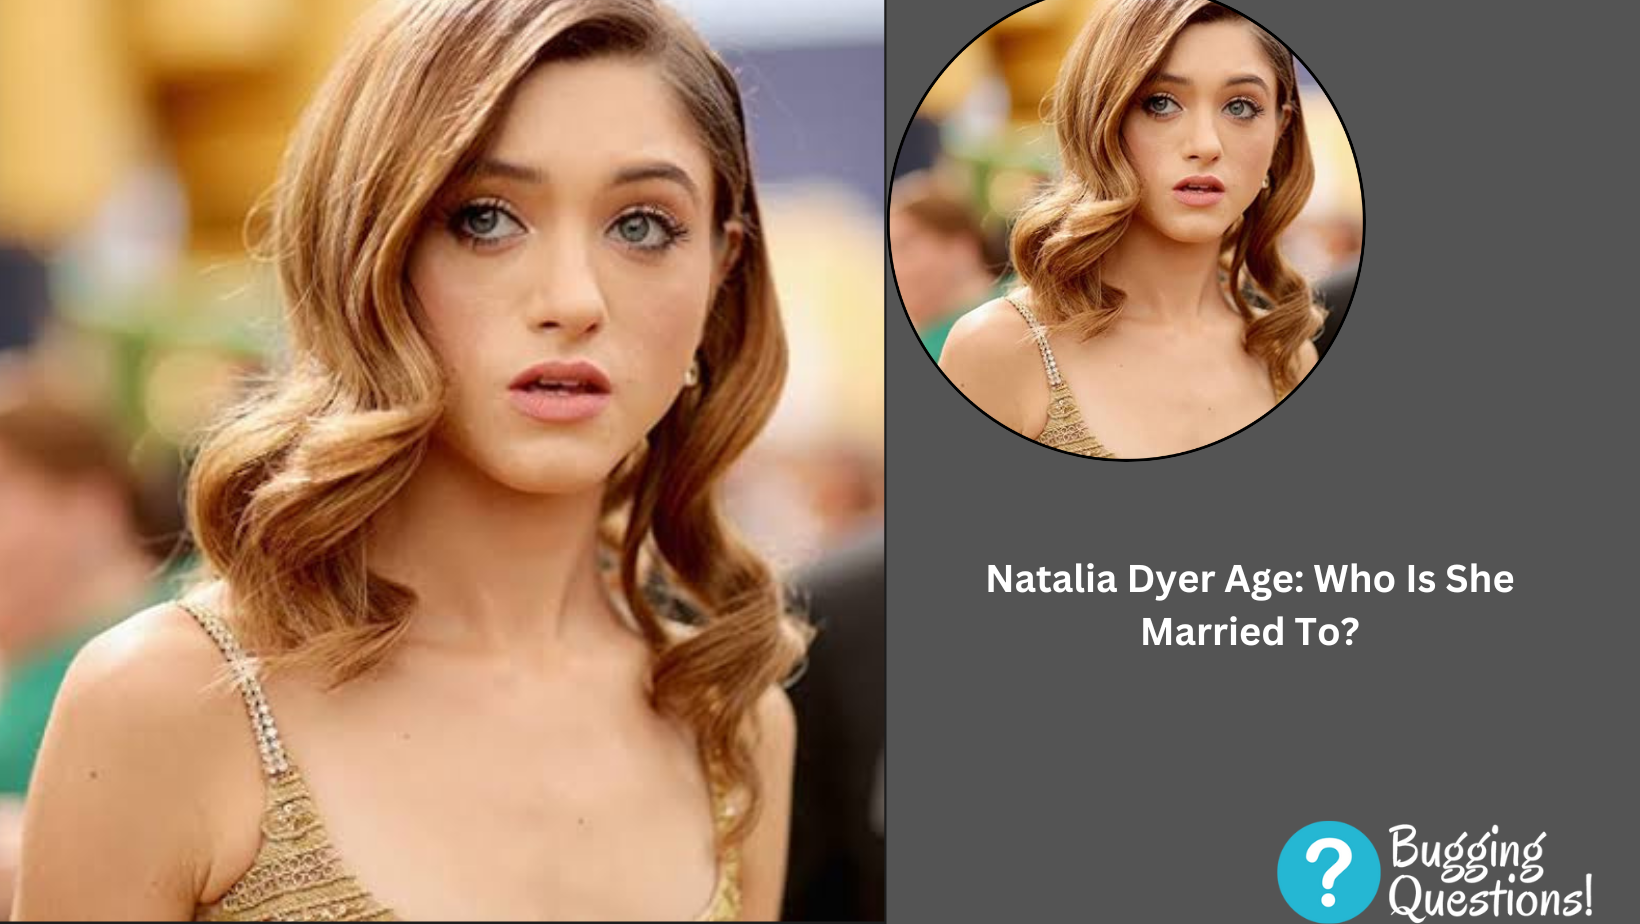 Natalia Dyer Age: Who Is She Married To?